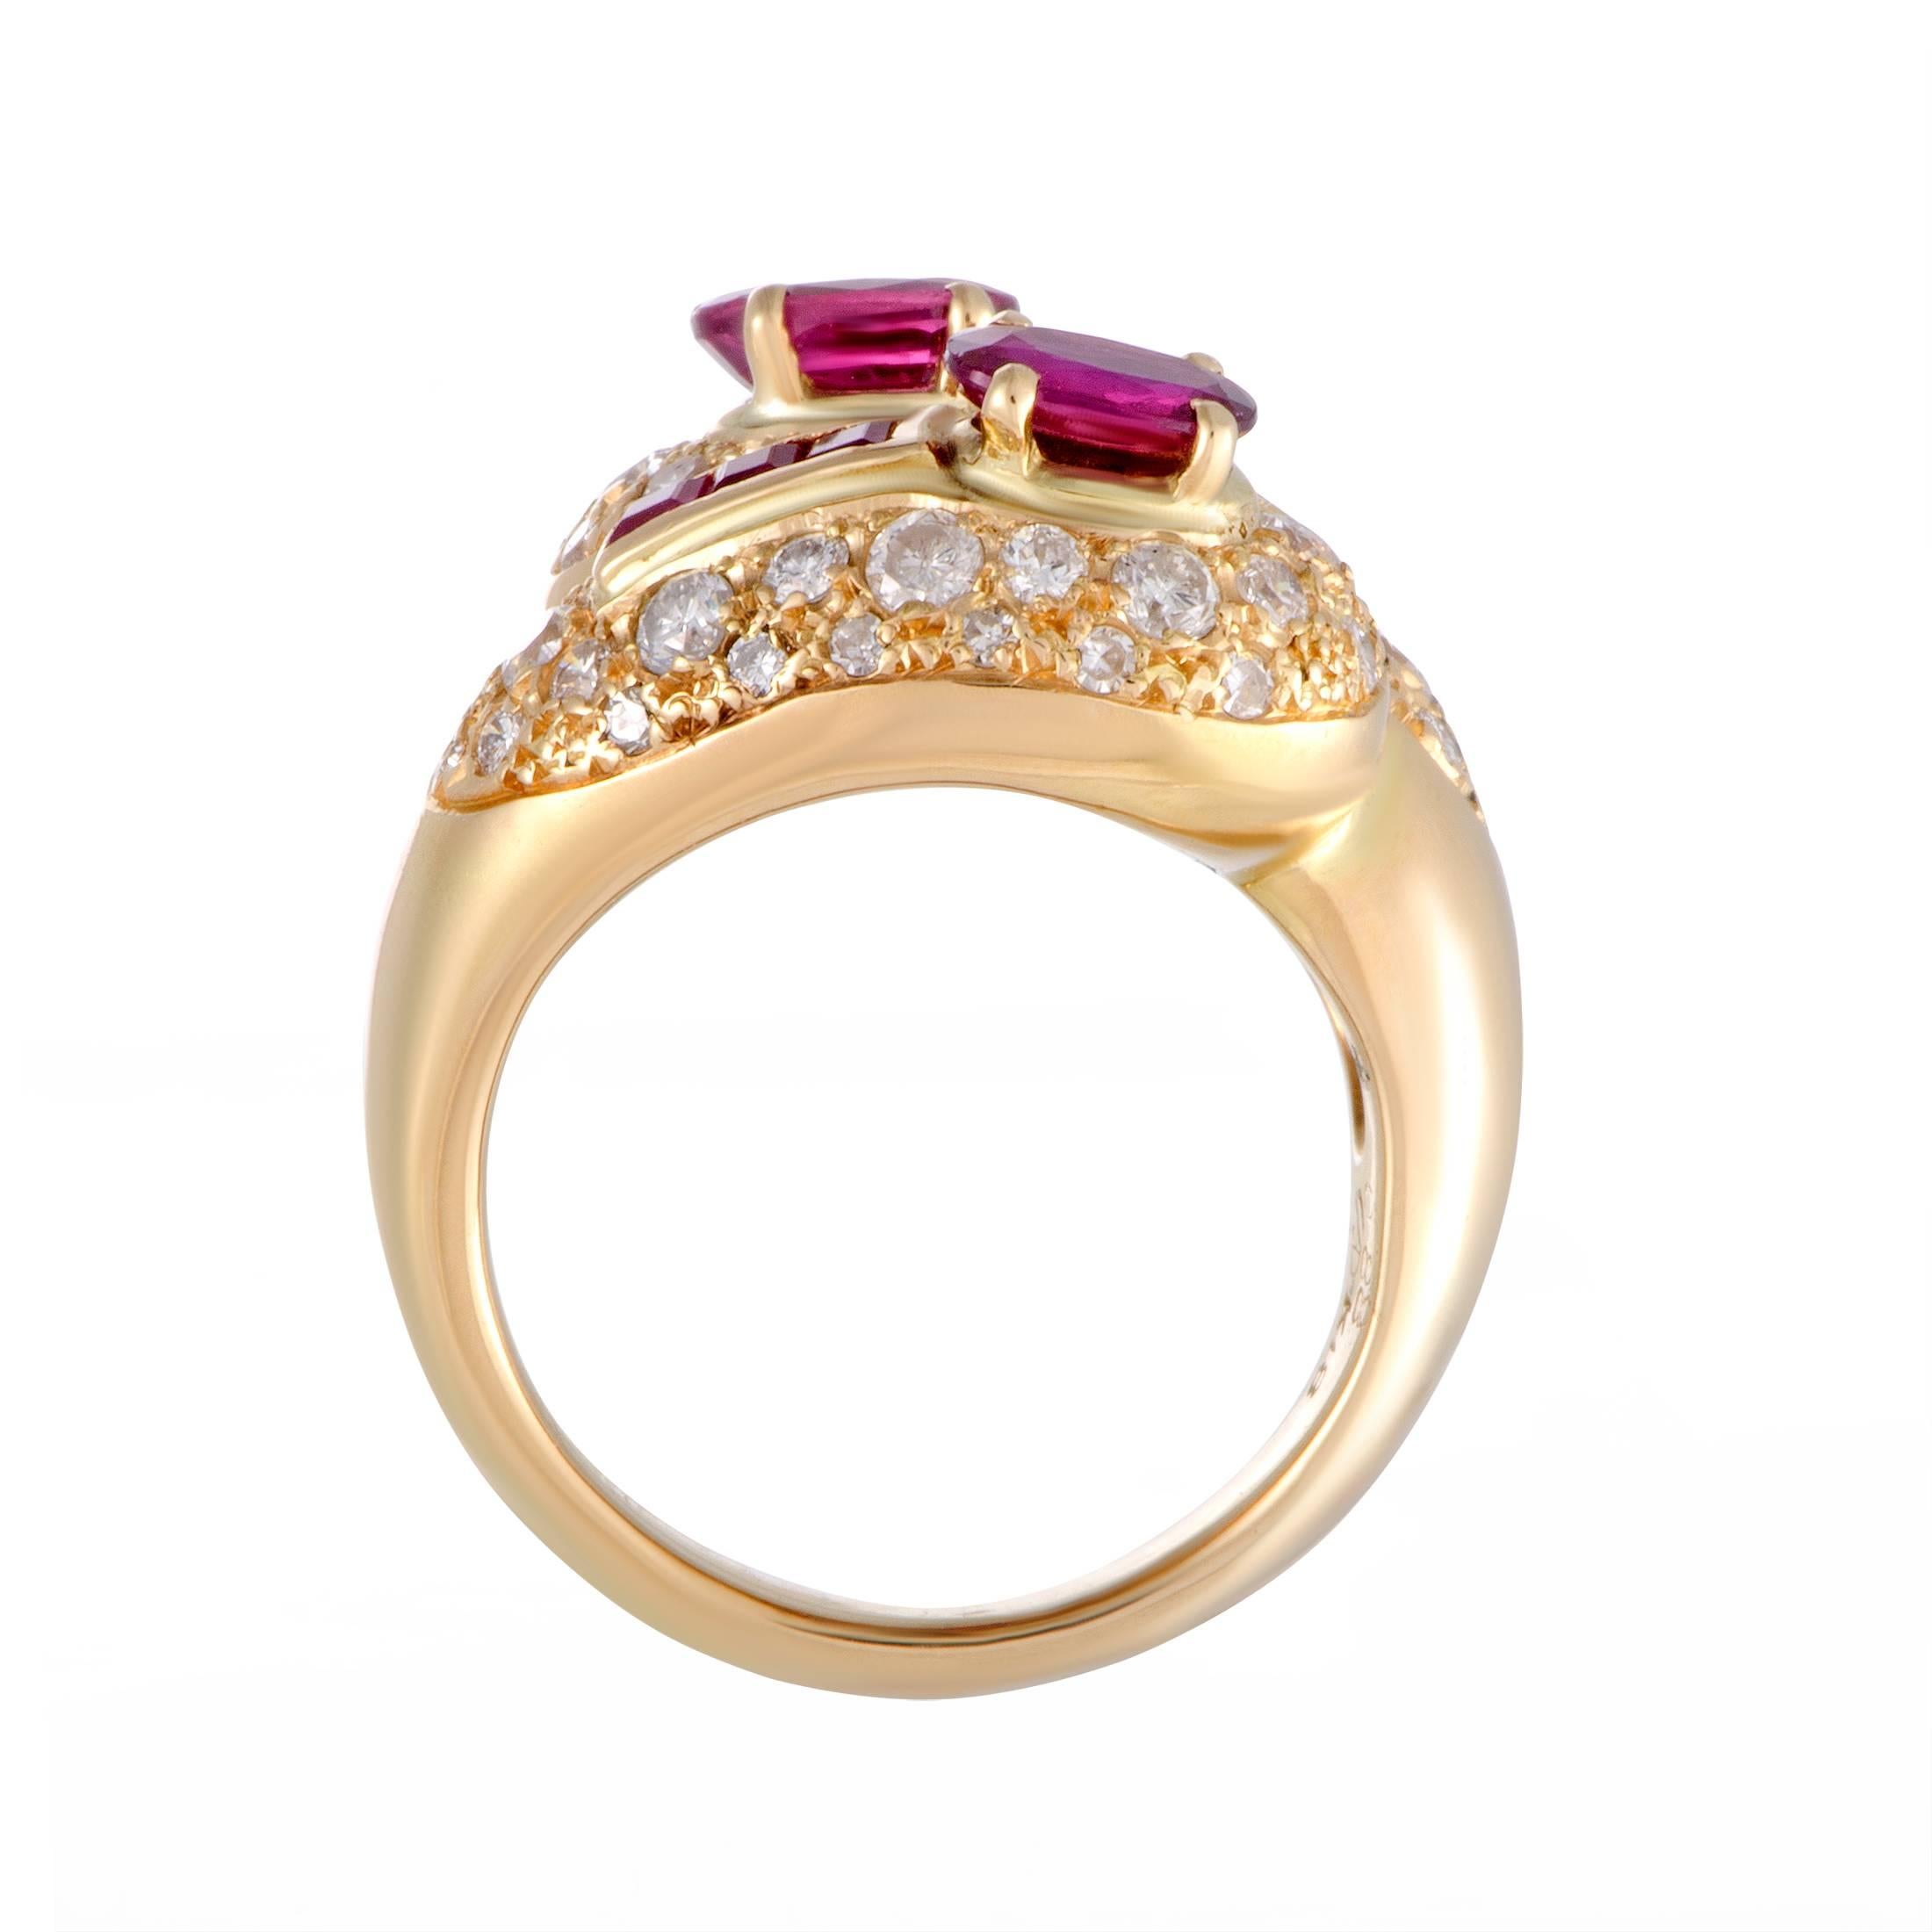 The essence of prestigious extravagance is embodied in this magnificent ring that features compelling design and opulent décor. The ring is made of 18K yellow gold and embellished with 0.88 carats of diamonds and 1.50 carats of rubies.
Ring Size: